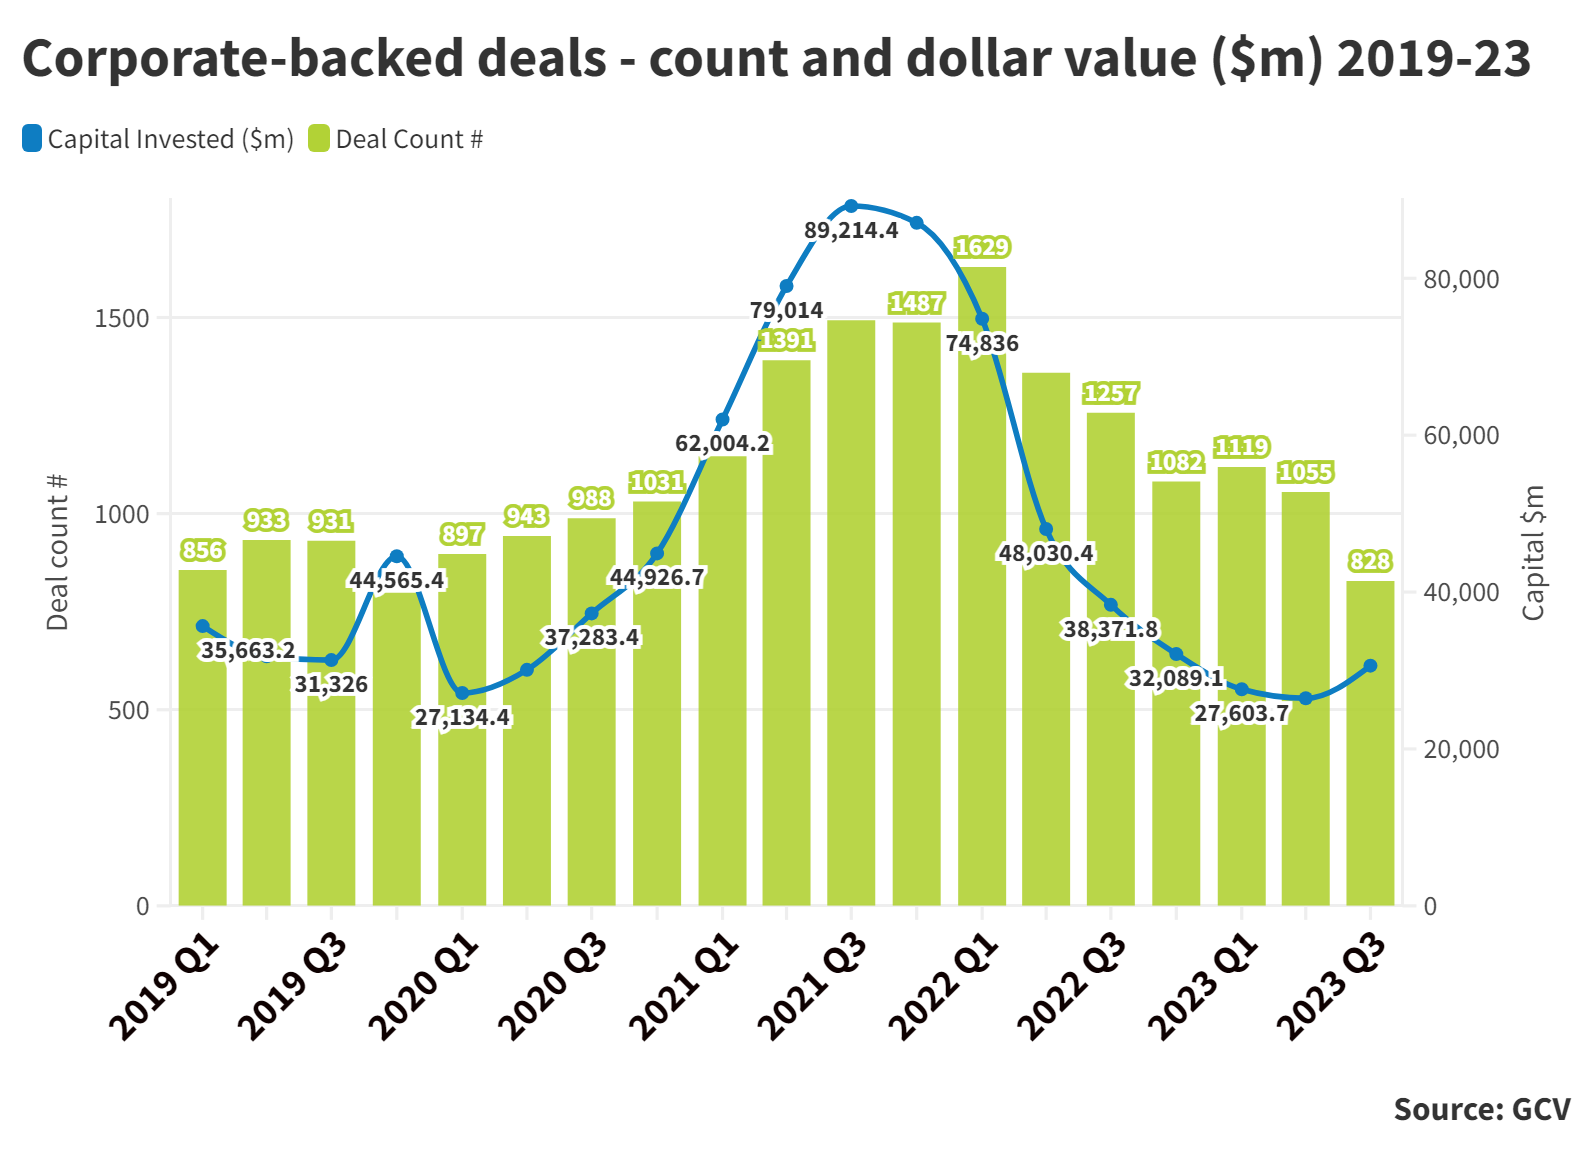 Bar chart showing corporate-backed deals by count and dollar value ($m) on quarterly basis 2019-23. Source: GCV